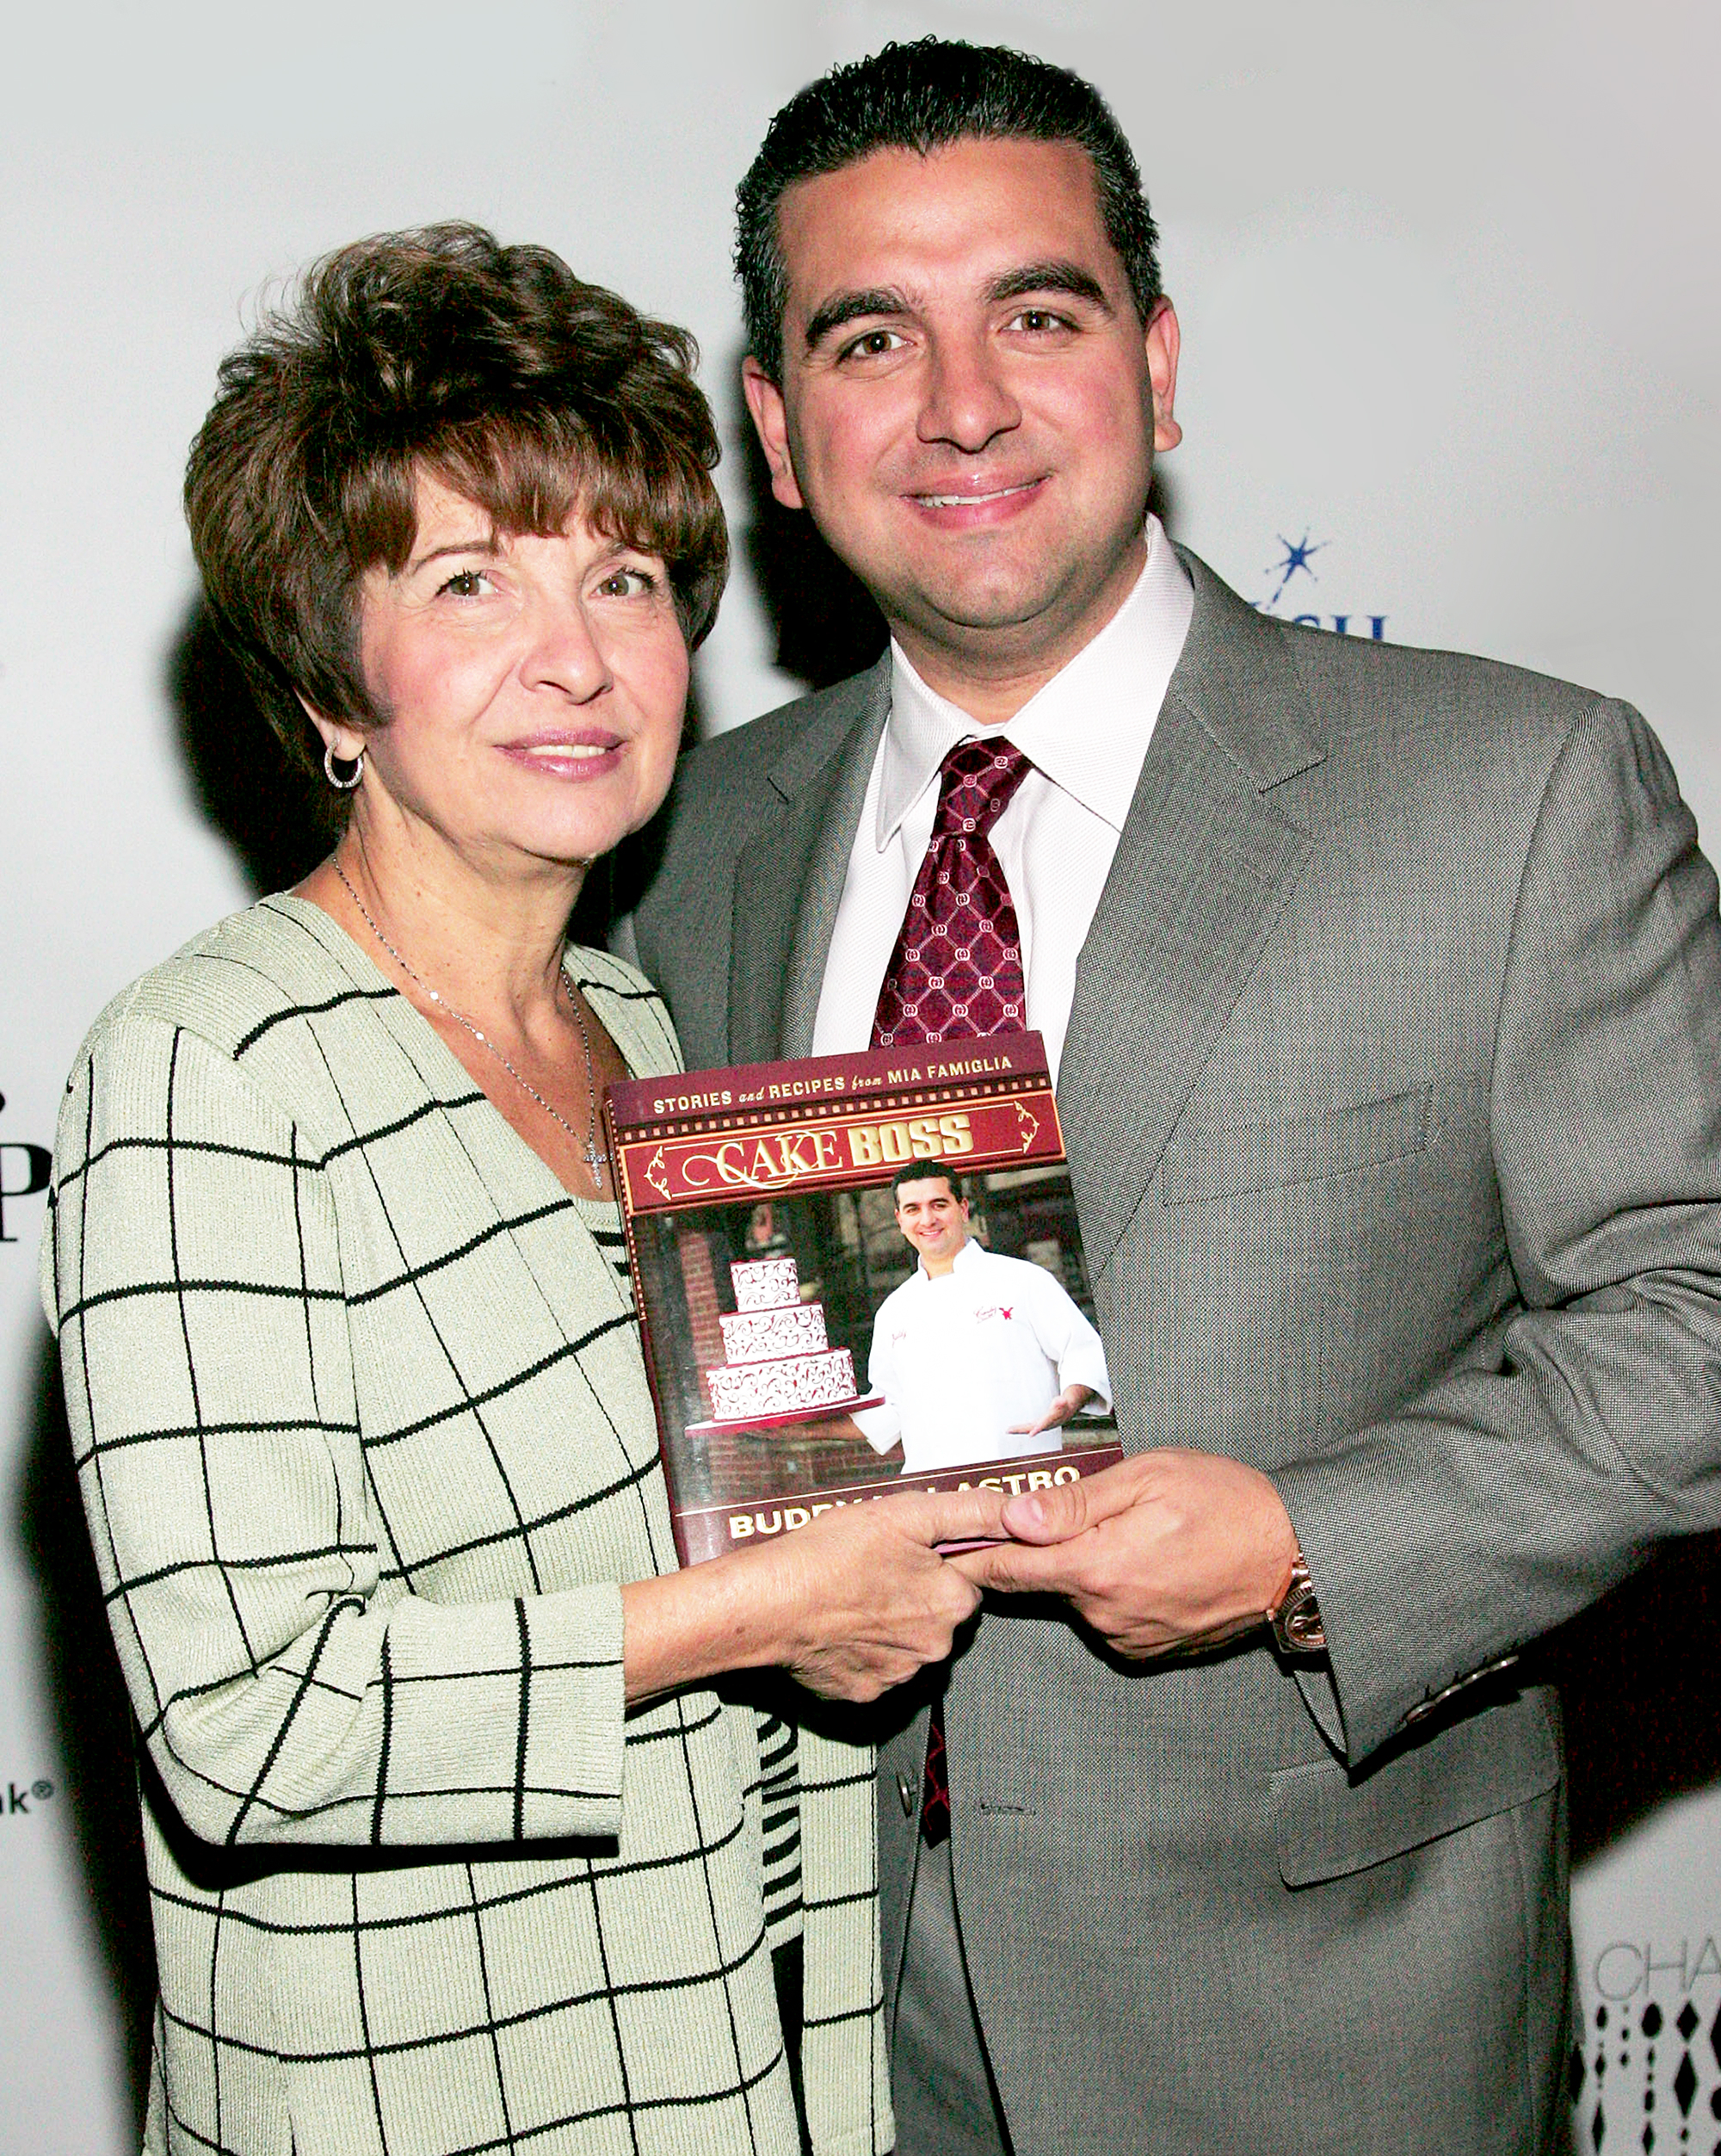 Cake Boss' to share his baked-in talents at AMT | Entertainment |  lancasteronline.com